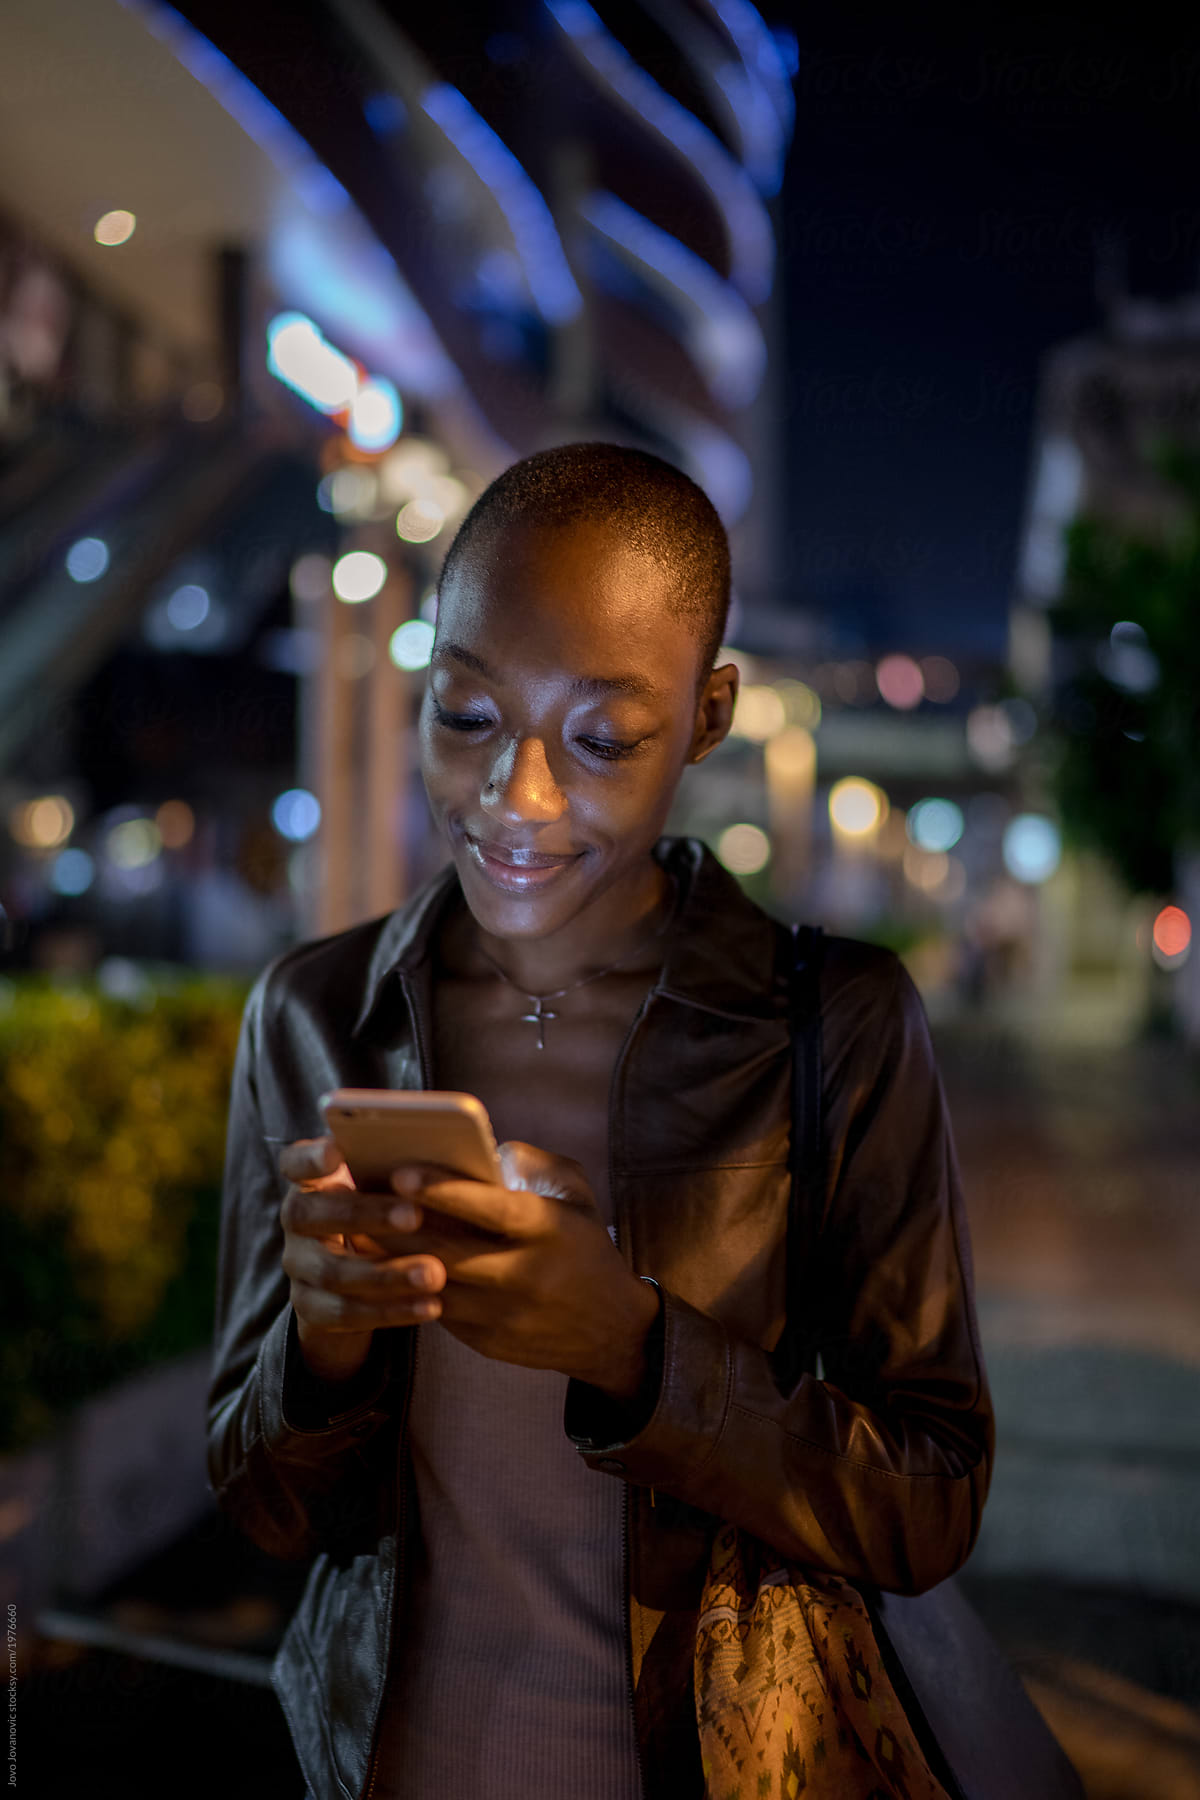 Vertical portrait of a woman using her phone at night